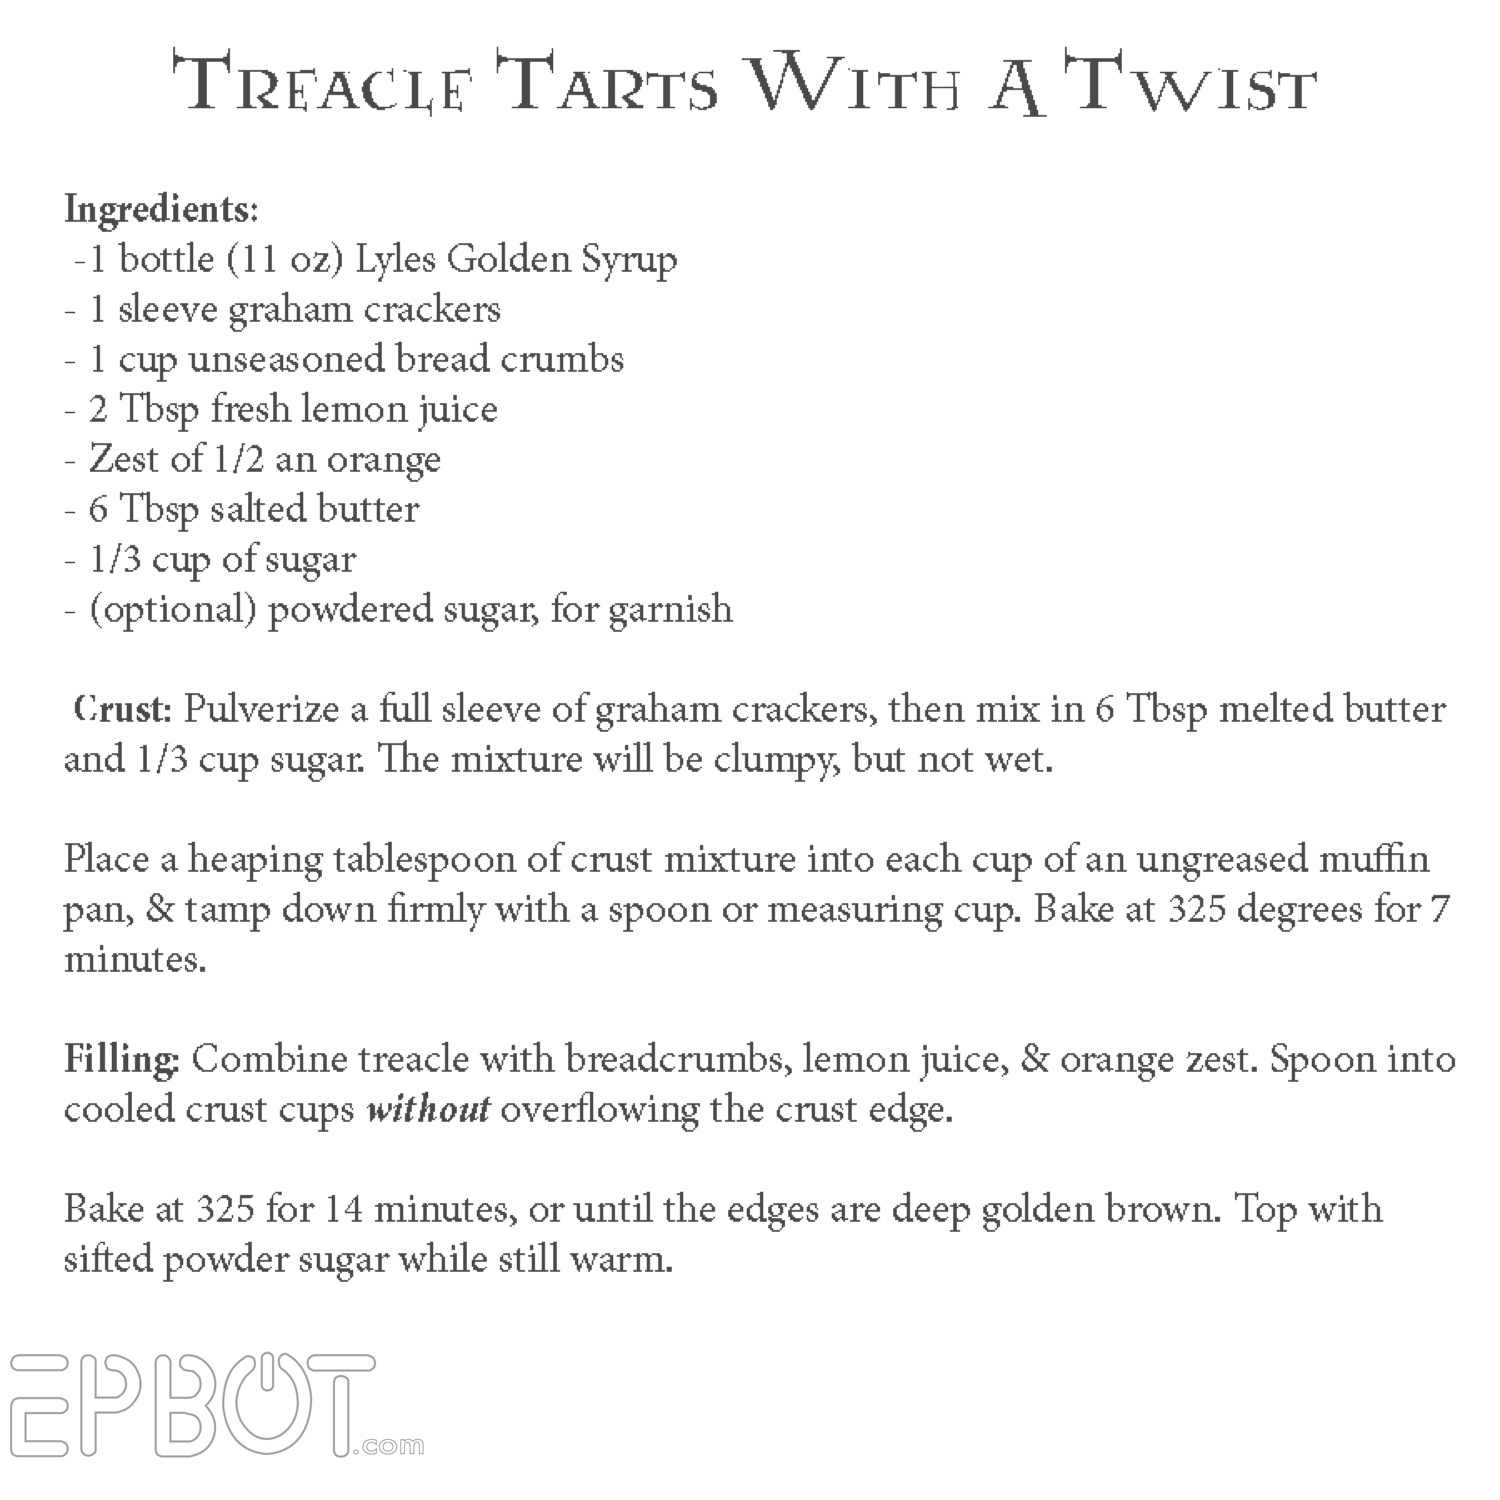 EPBOT: A New Twist On Treacle Tarts (From Our Potter Party!)